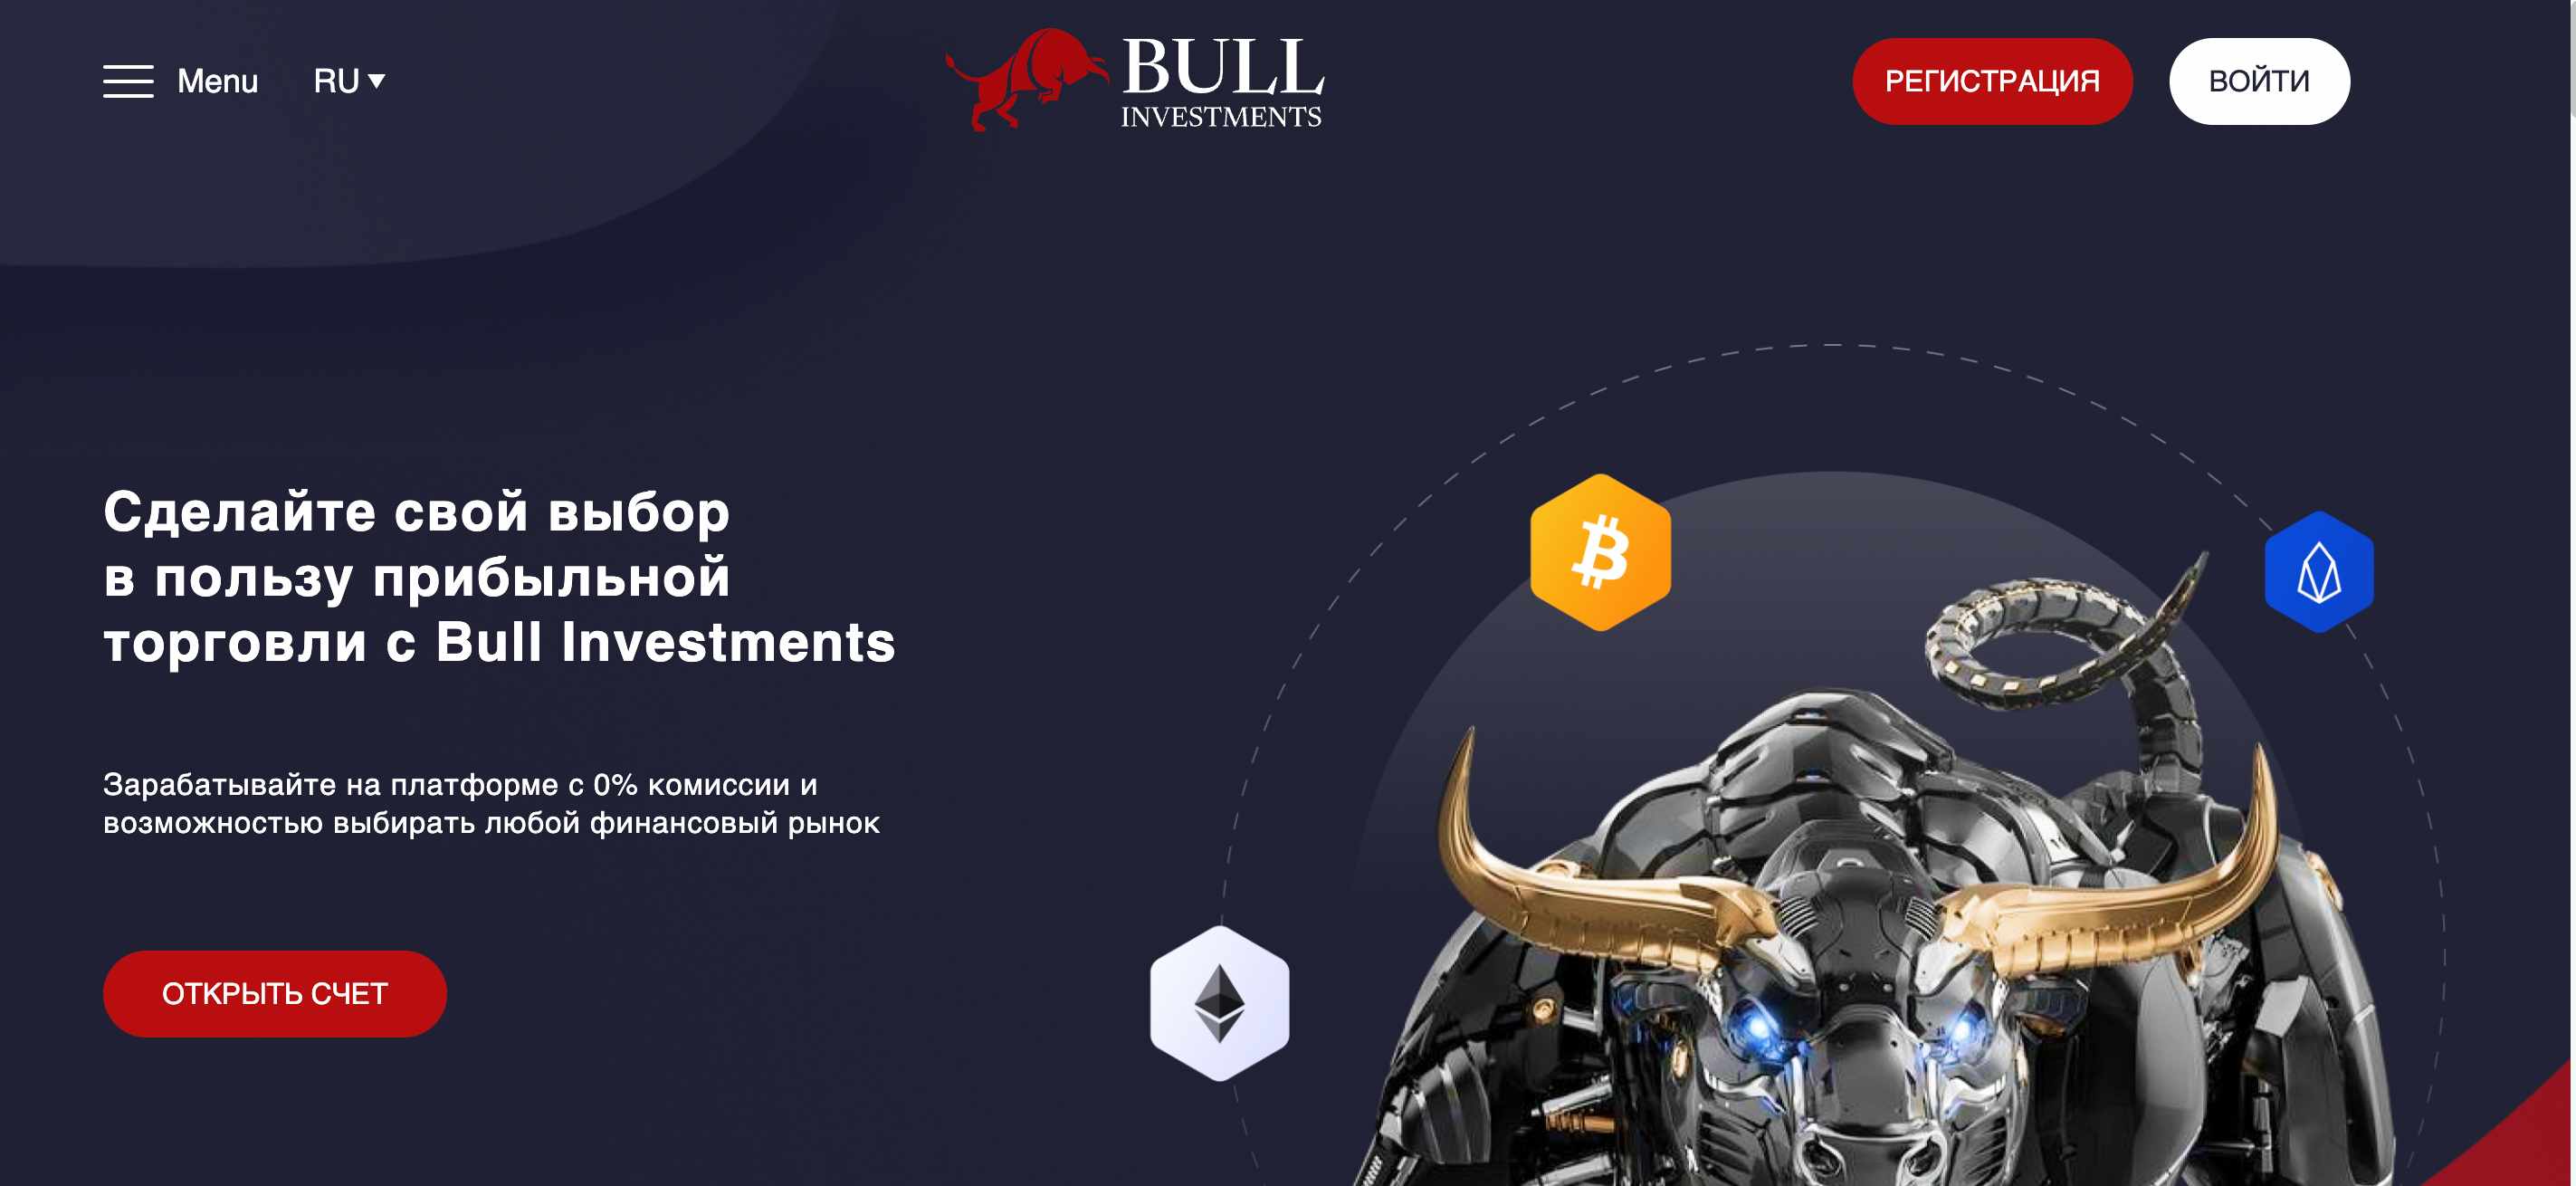 Bull Investments 